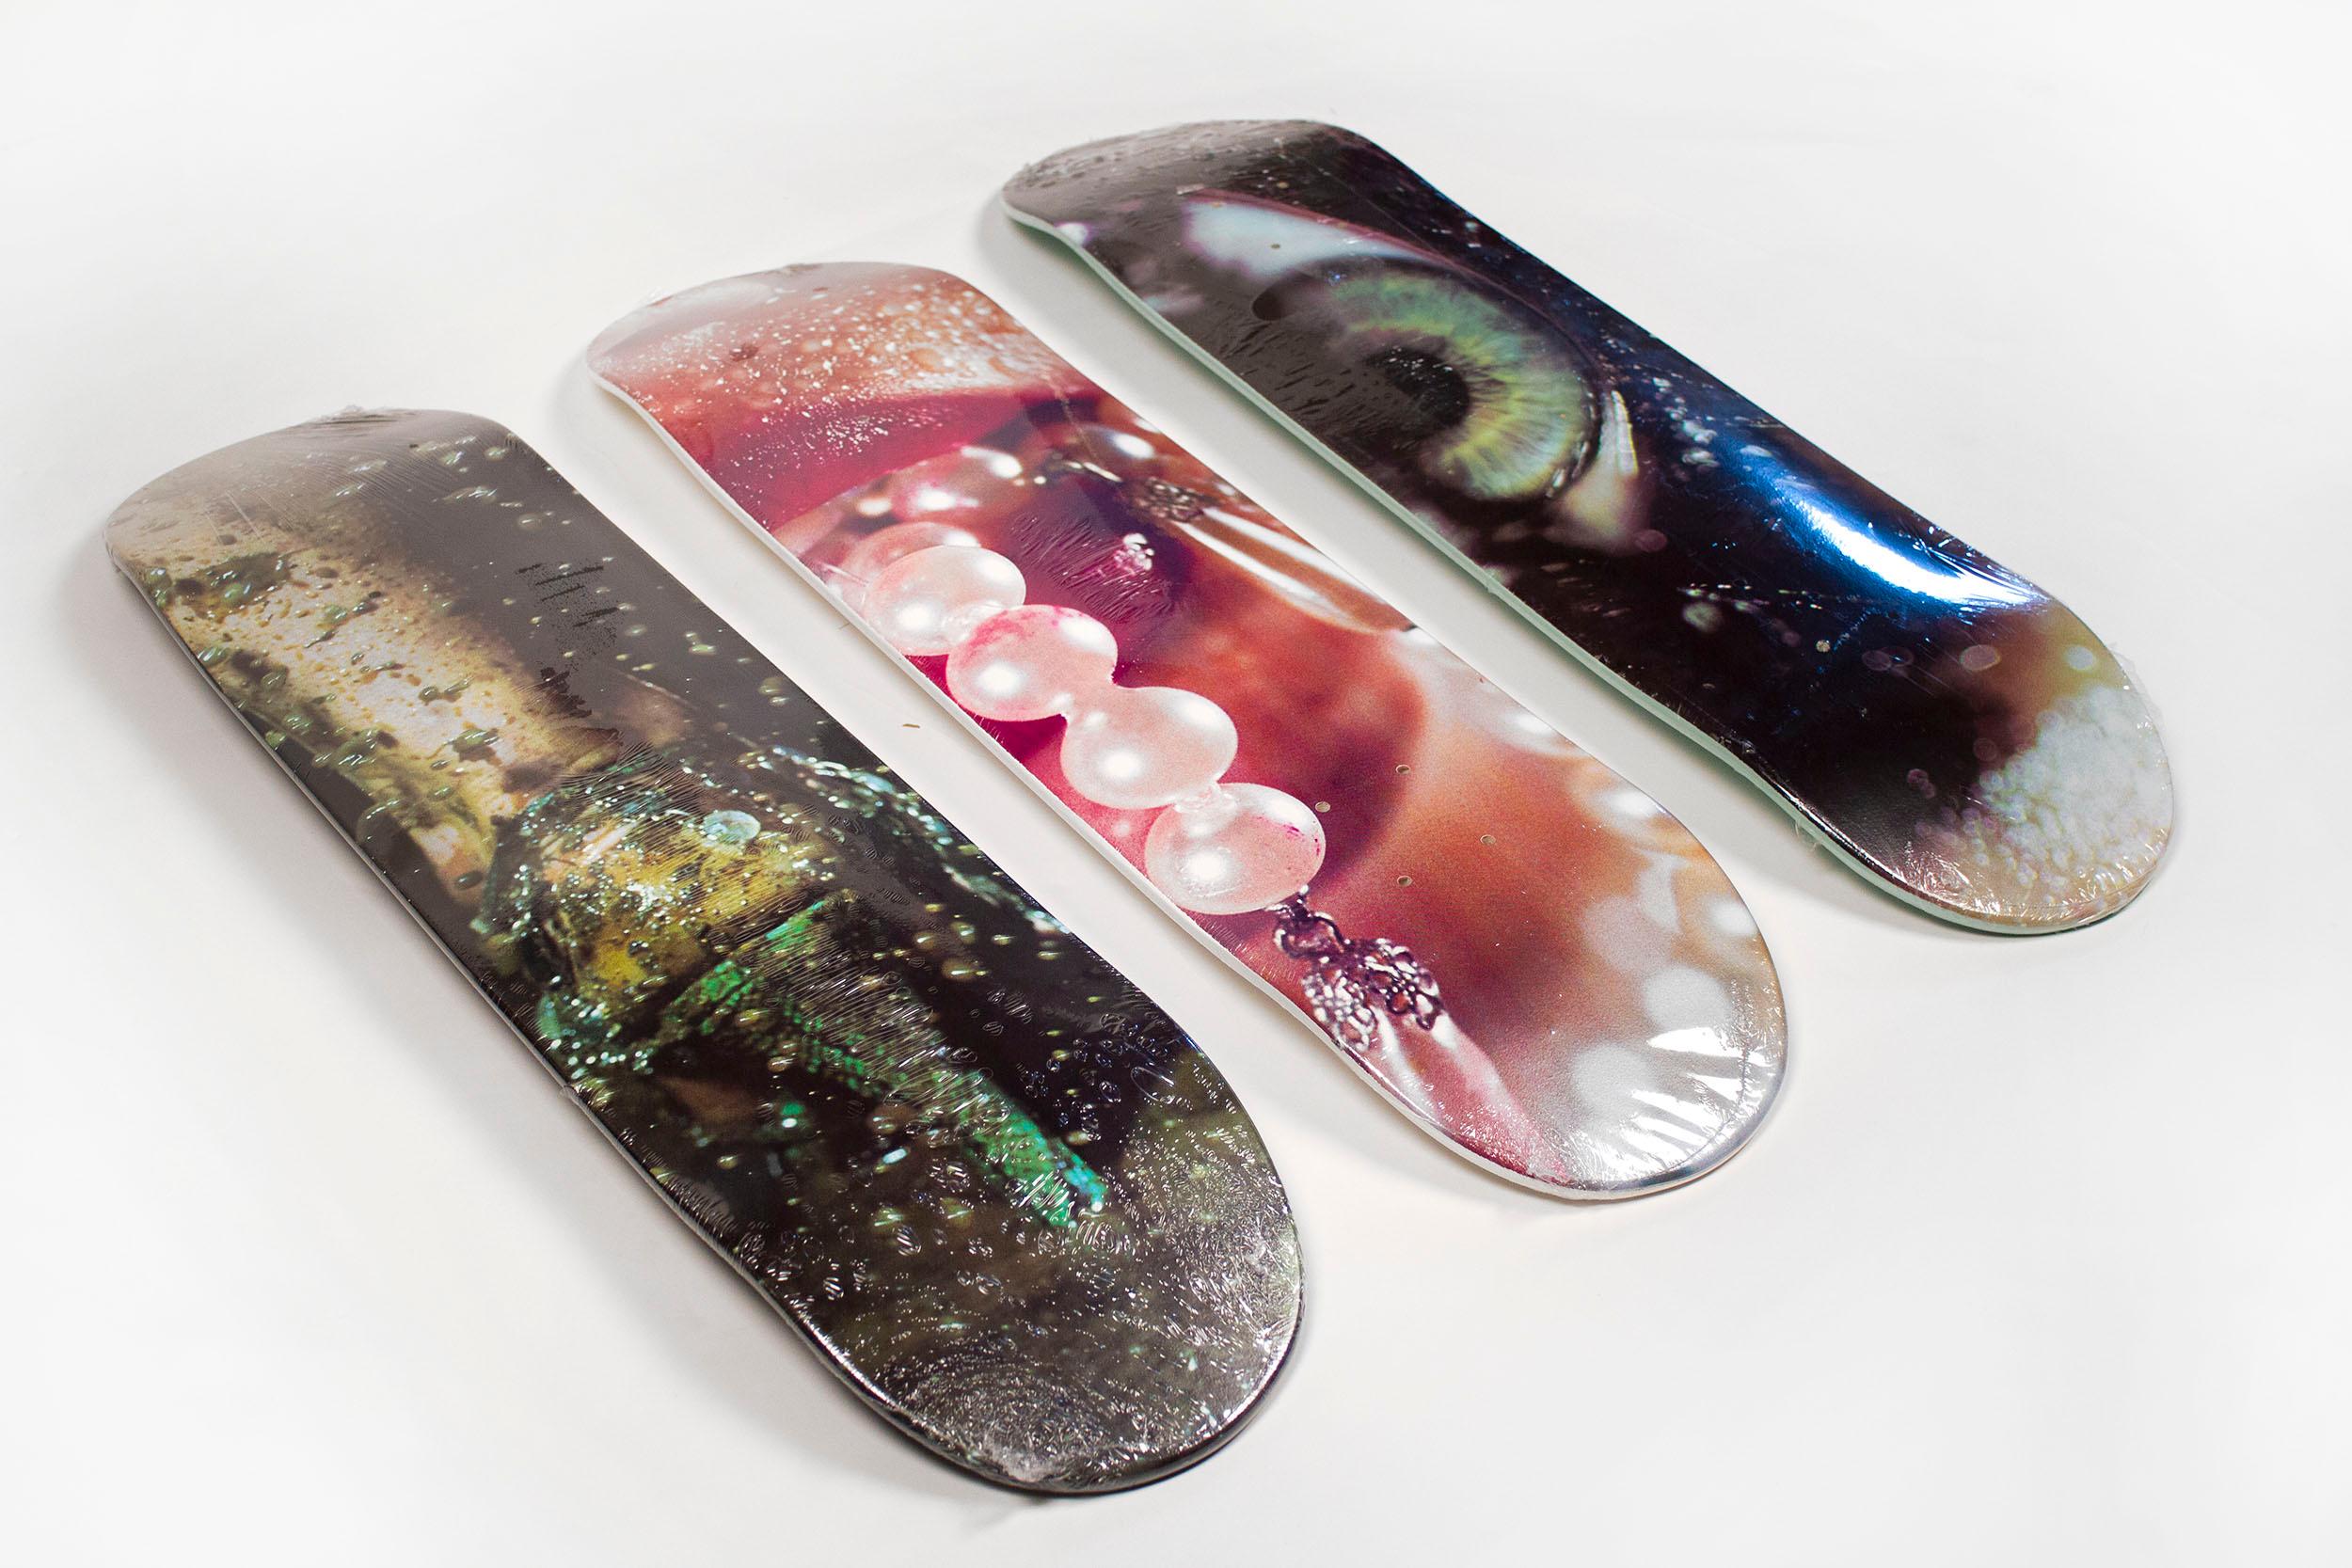 Rare complete set of three full color printed skate decks by Marilyn Minter for Supreme. 
Published by Supreme New York in 2008

Retains original shrinkwrap.